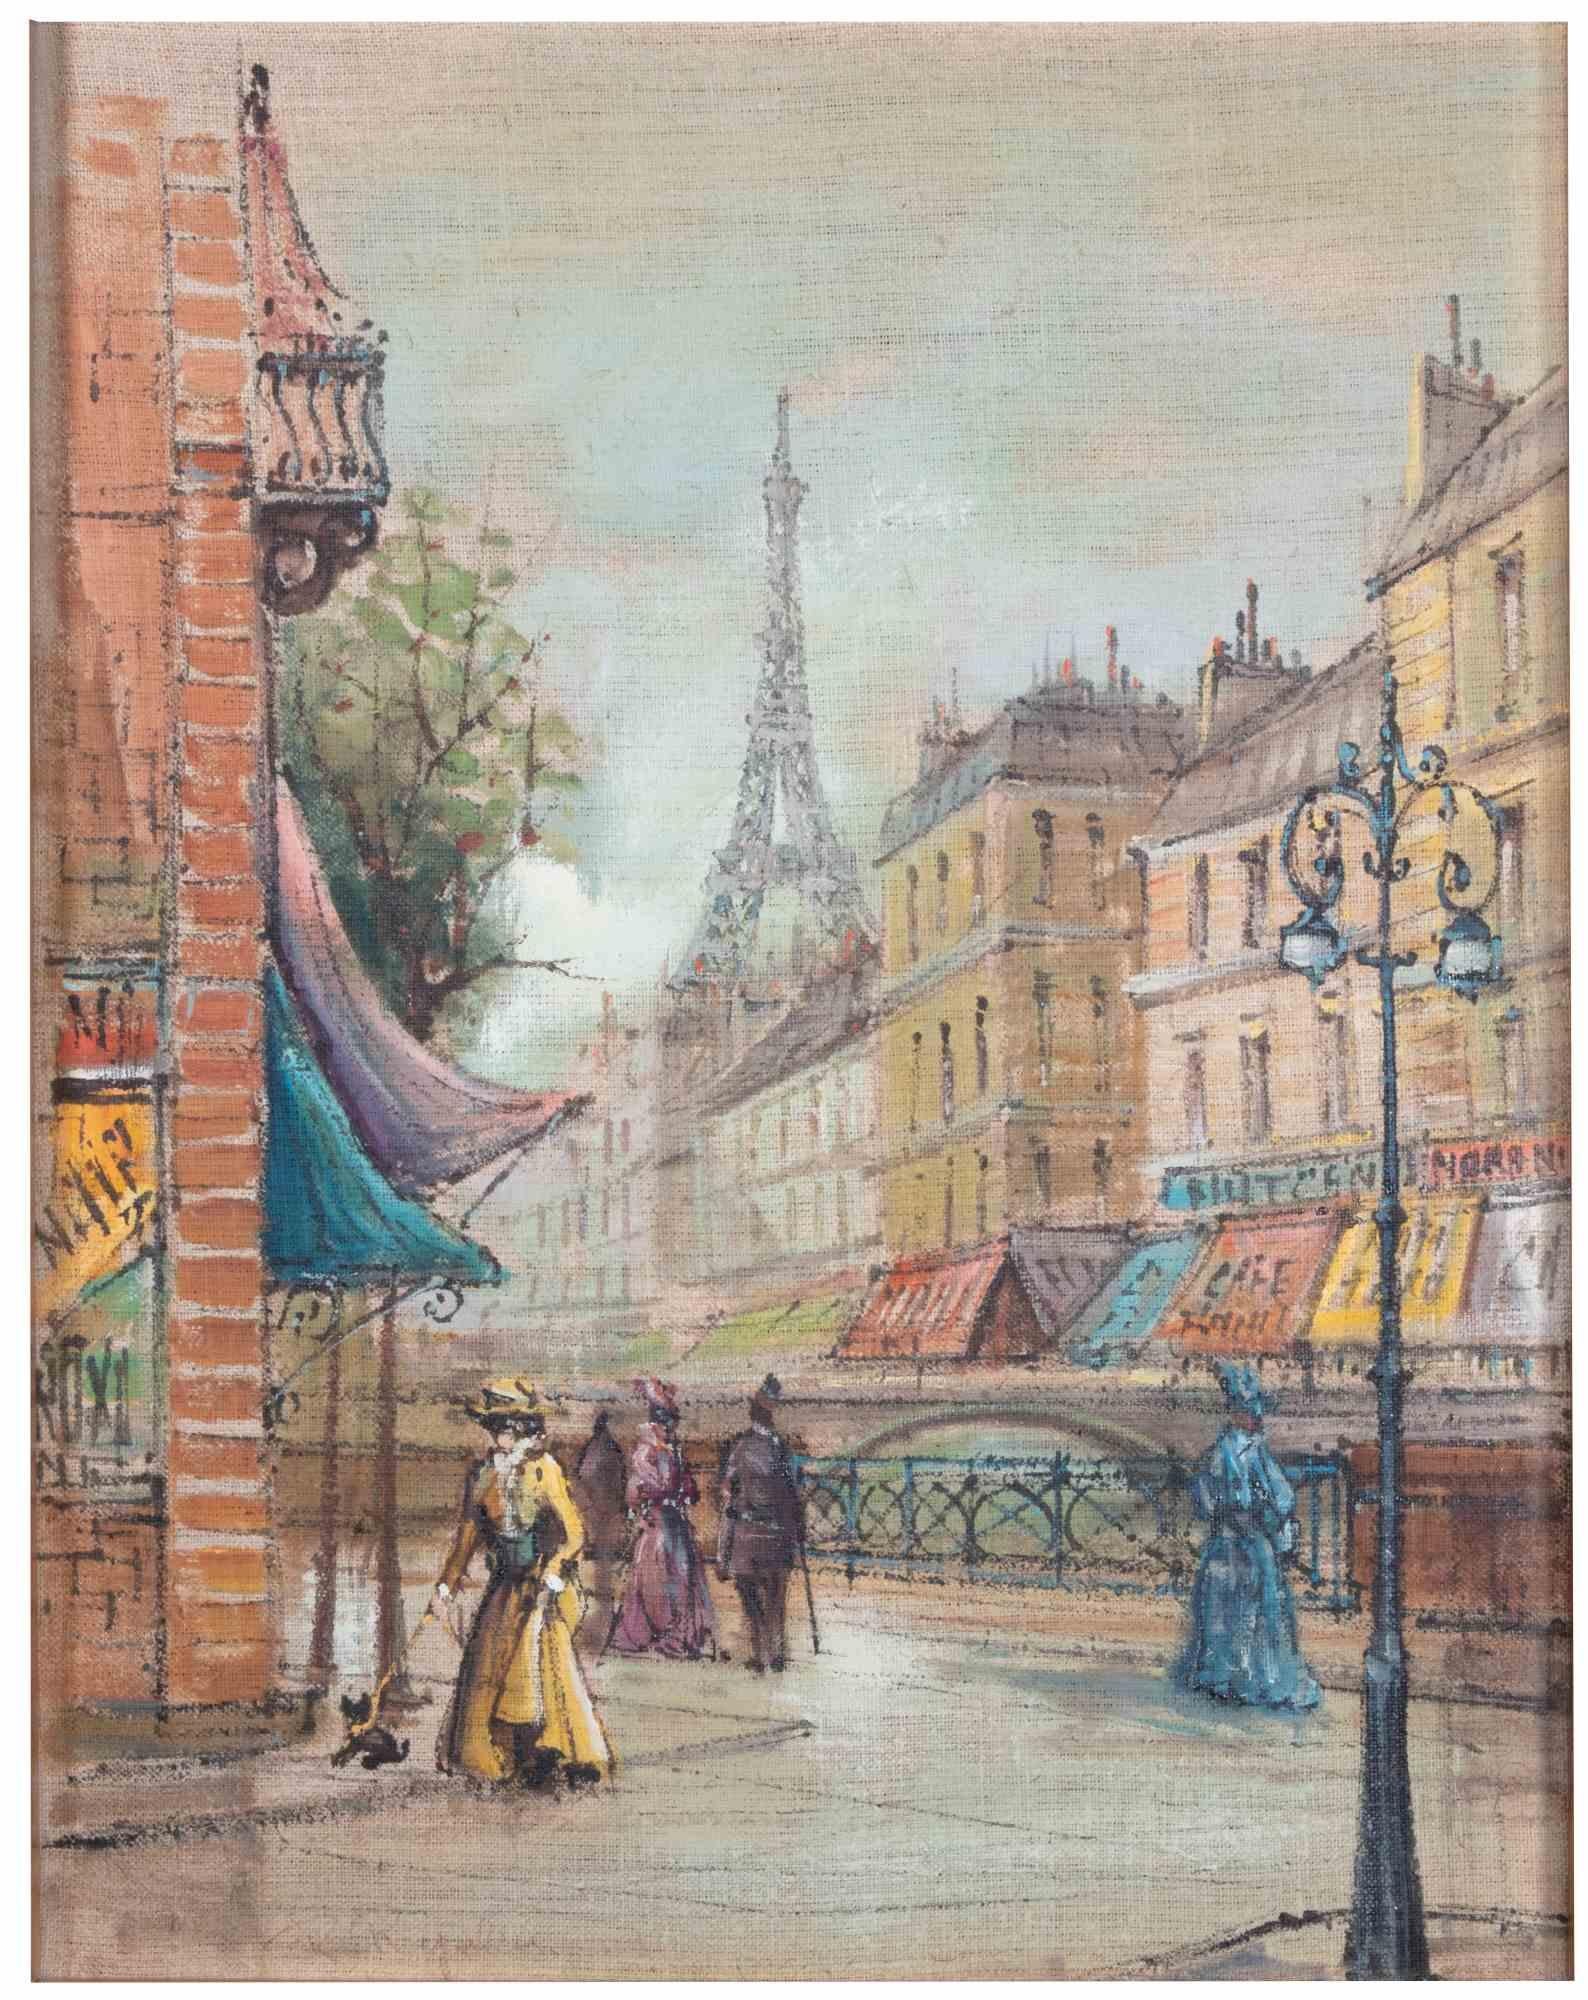 Paris et la belle époque is an artwork realized by Roberto Regalier in the mid-20th Century.

50X50 cm, 83 x 73 cm frame included.

Oil Pastel on canvas.

Signature in the lower part with certificate label on the rear.

Vertical prospective